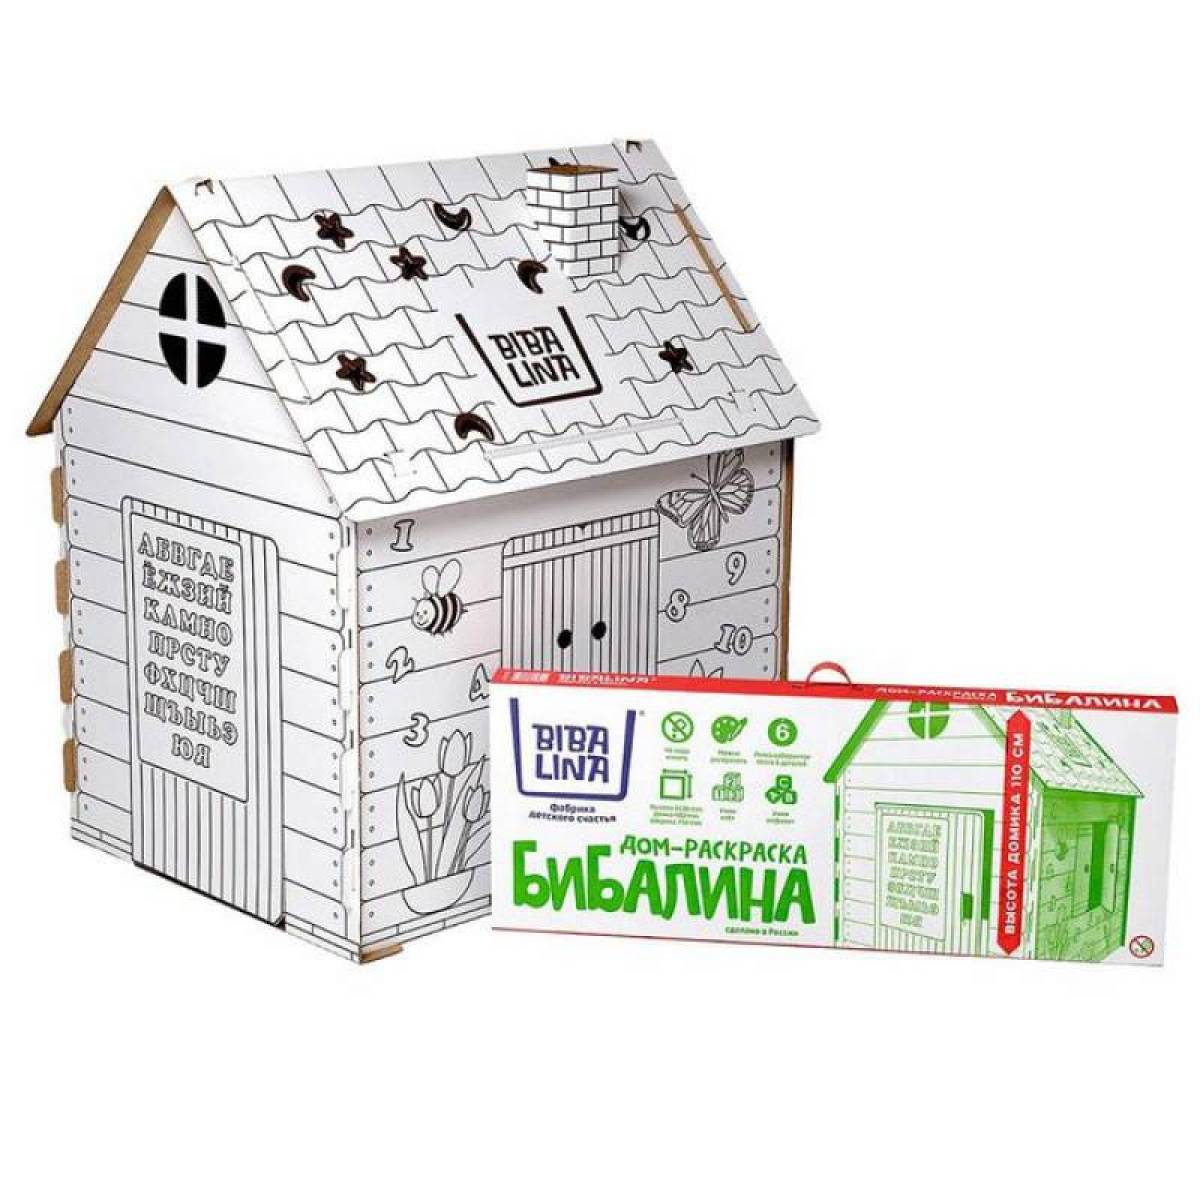 Coloring page nice cardboard house